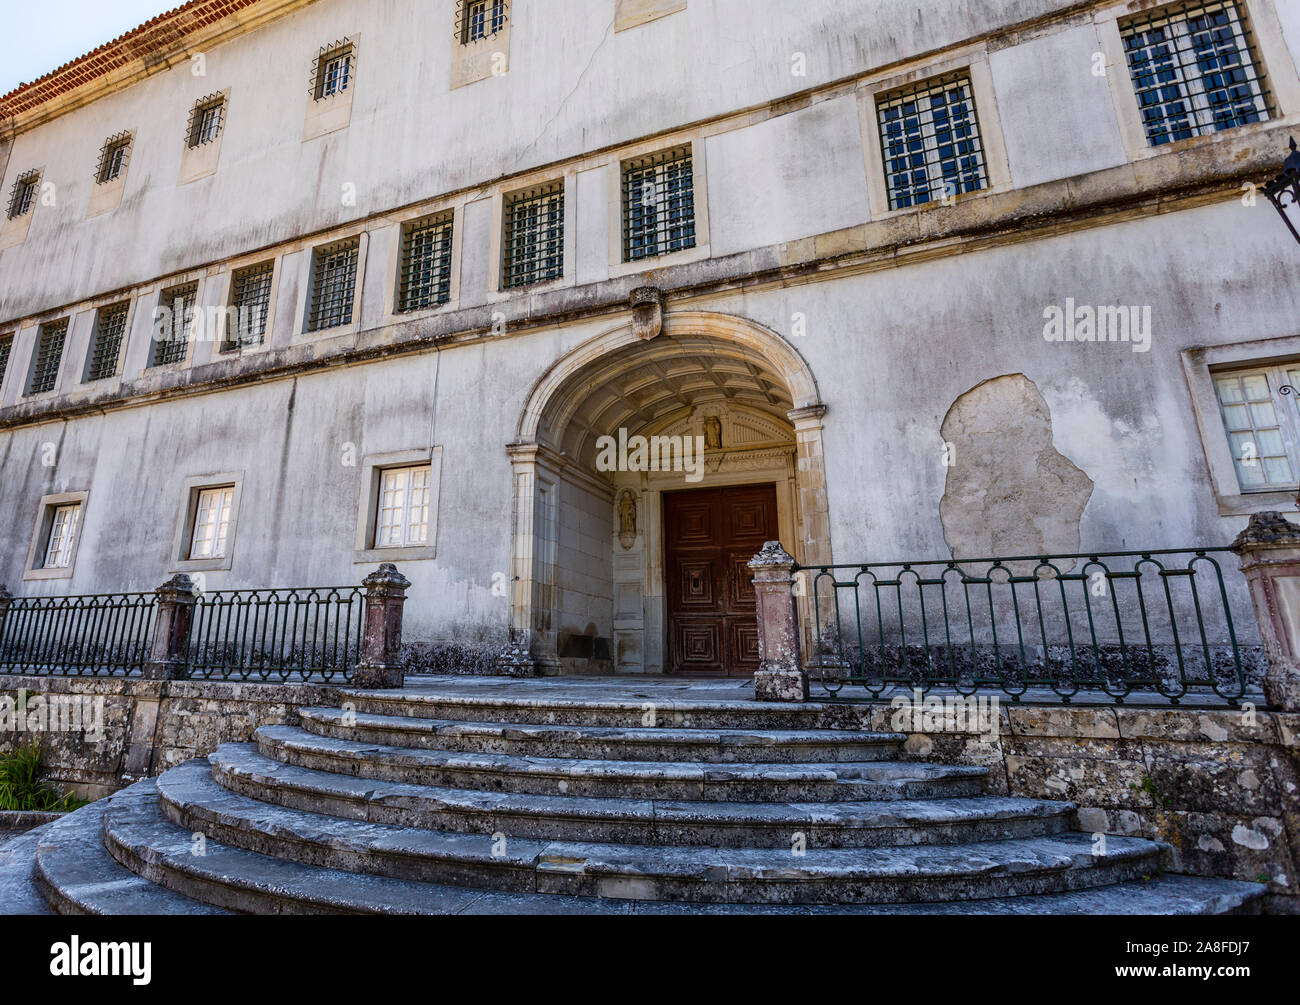 Facade and main entrance to the convent building of the Monastery of Saint Mary of Lorvao, Coimbra, Portugal Stock Photo